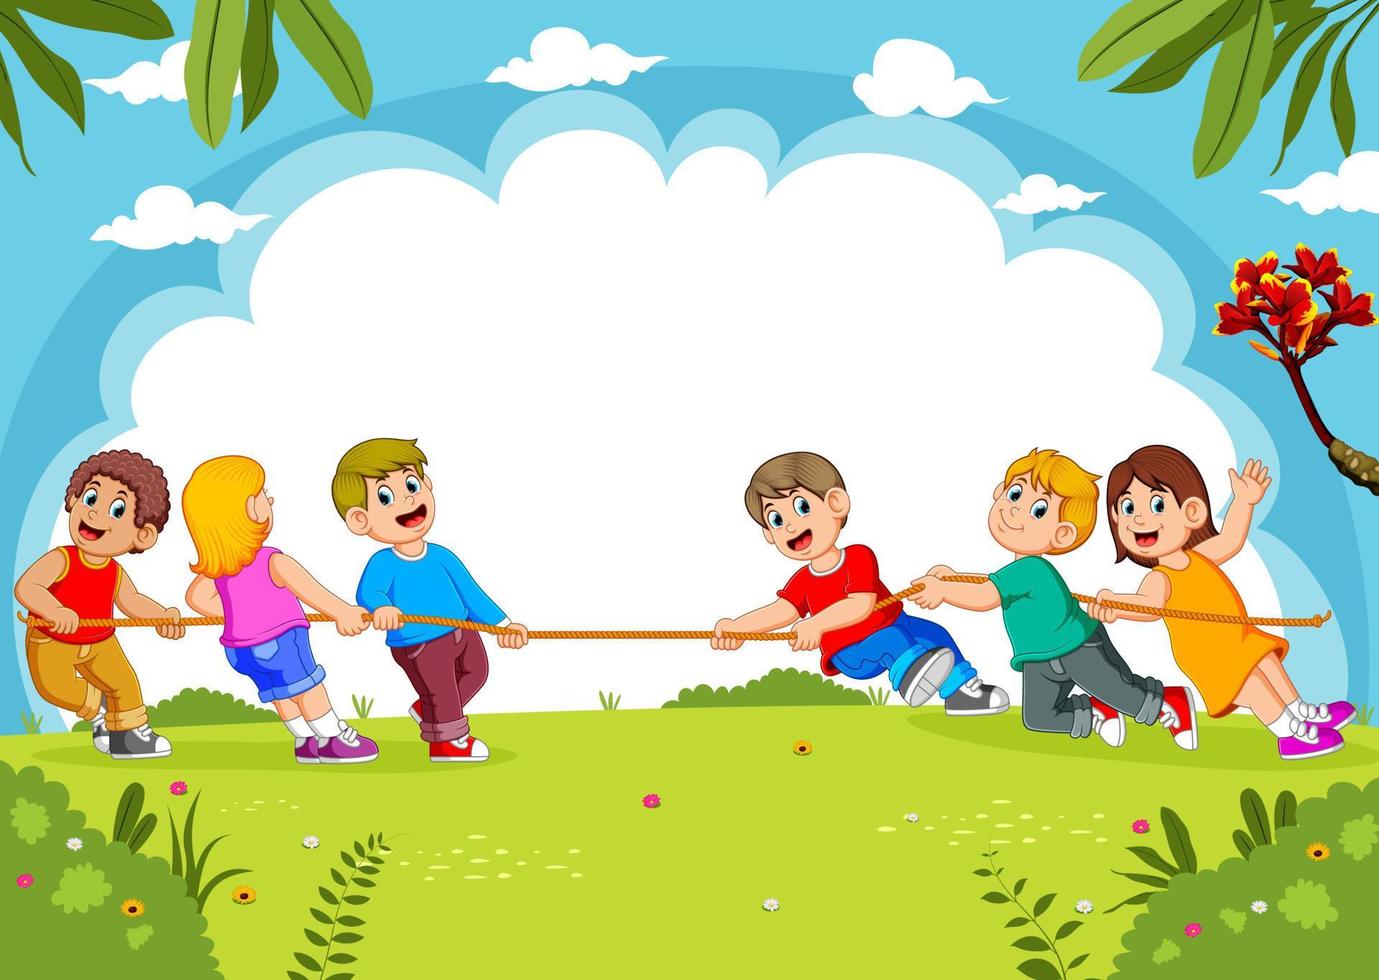 Children play tug of war in the park vector